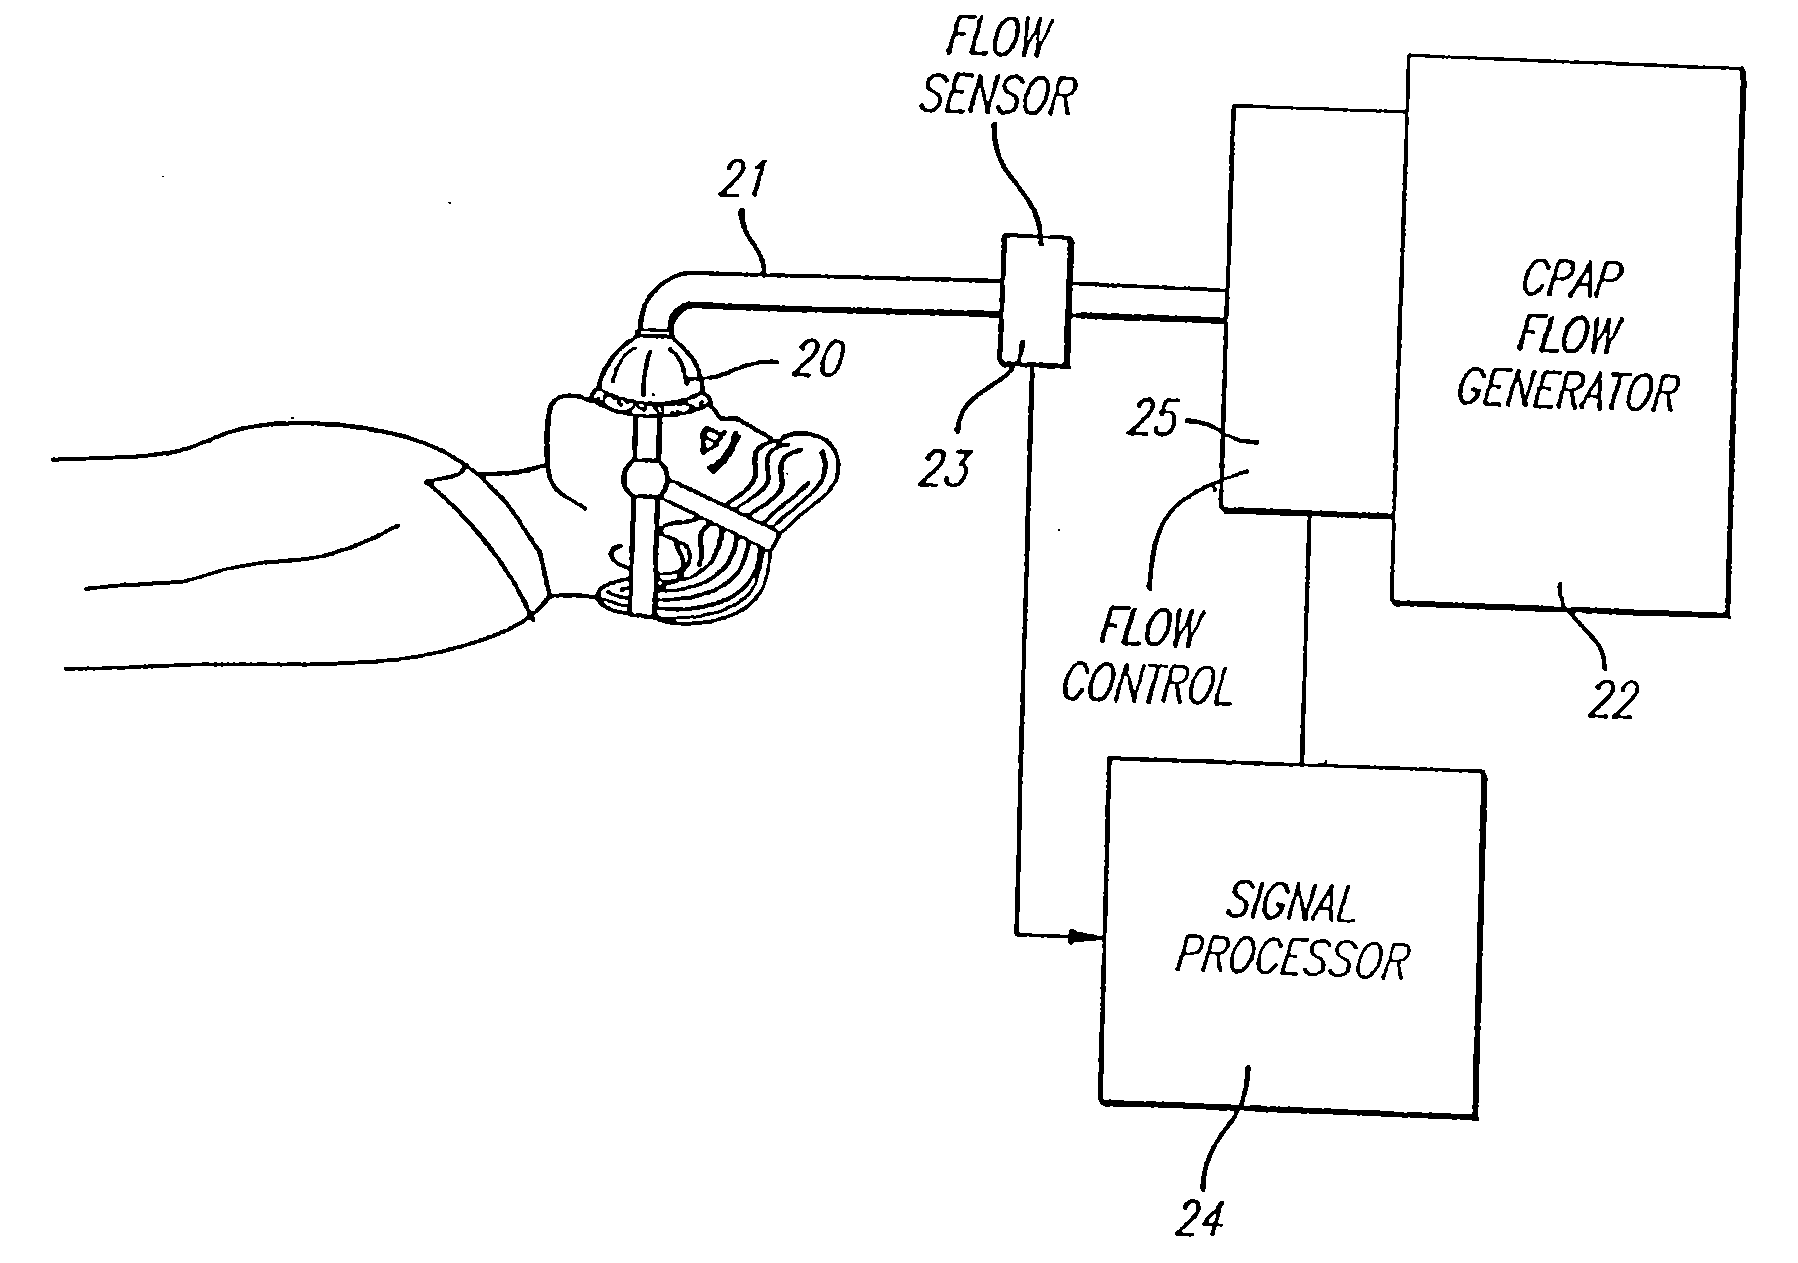 Method and Apparatus for Optimizing the Continuous Positive Airway Pressure for Treating Obstructive Sleep Apnea